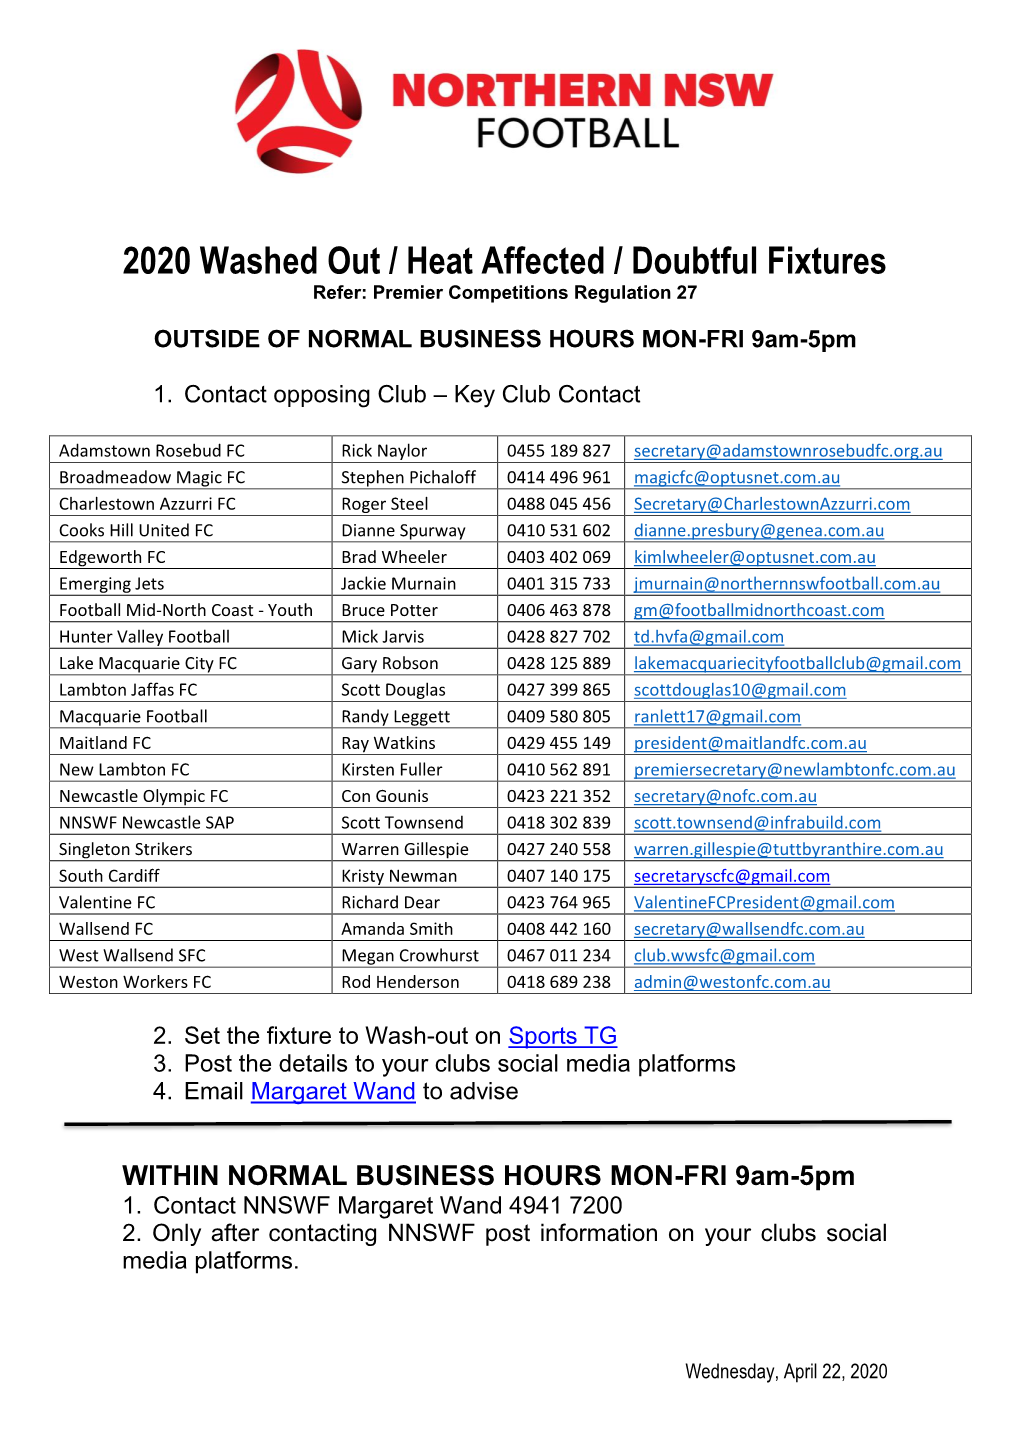 2020 Washed out / Heat Affected / Doubtful Fixtures Refer: Premier Competitions Regulation 27